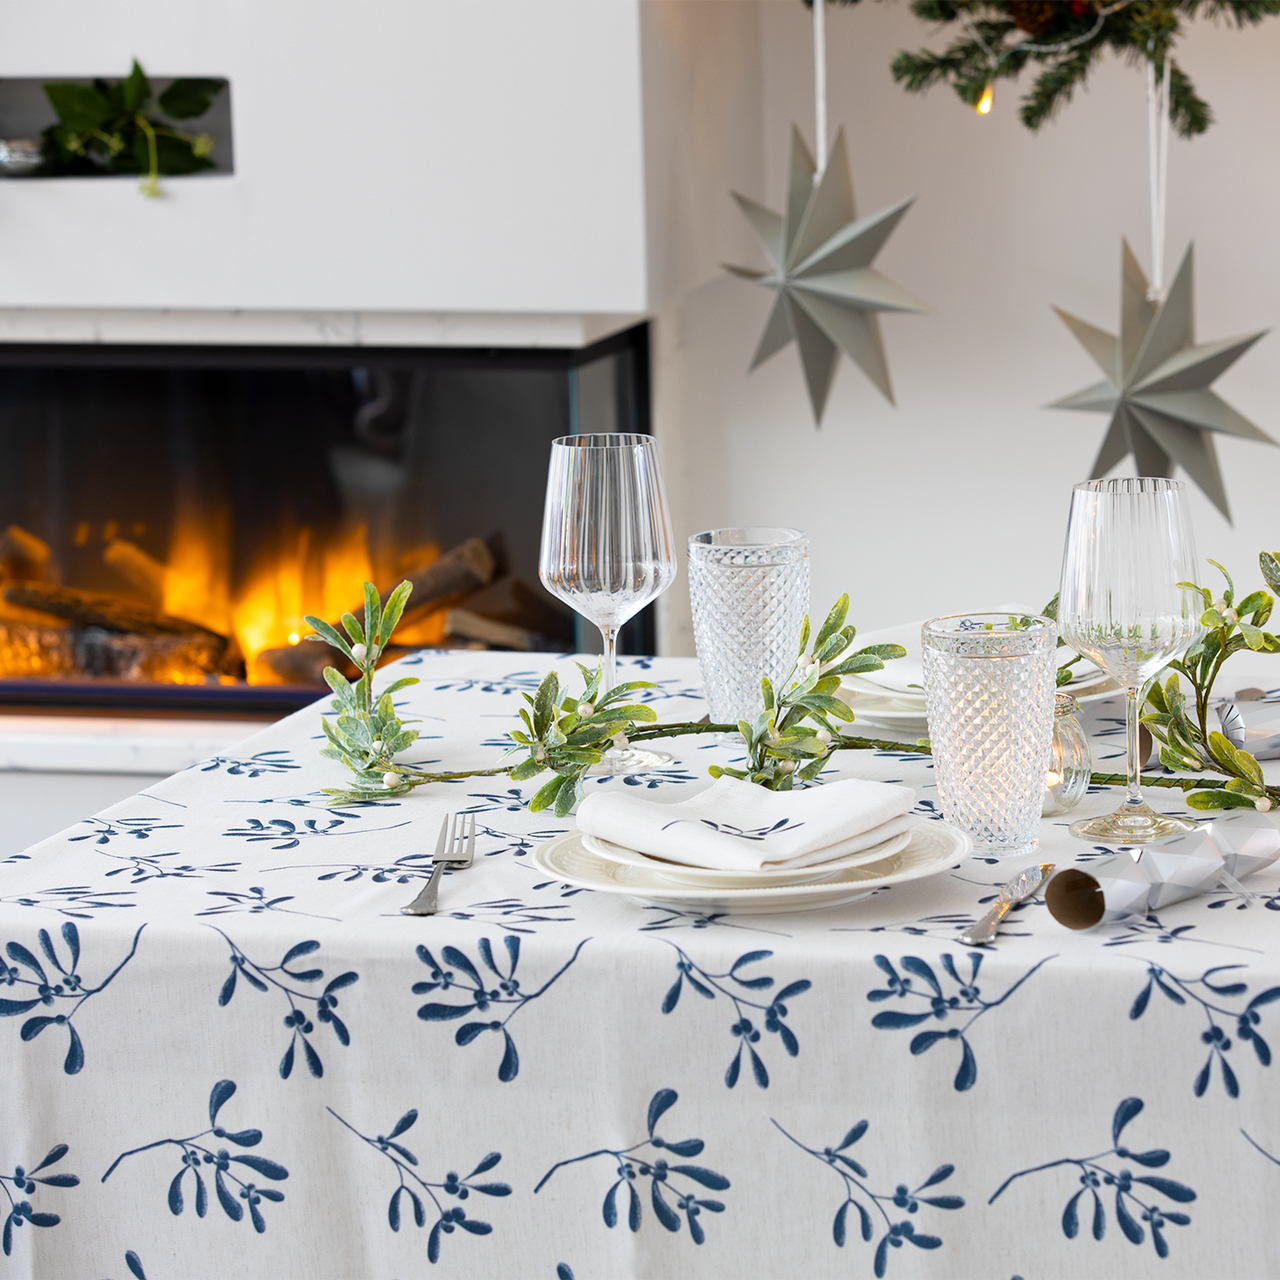 Celina Digby Luxury Christmas Linen-Like Tablecloth – Mistletoe White Available in 6 Sizes 220cm x 140cm